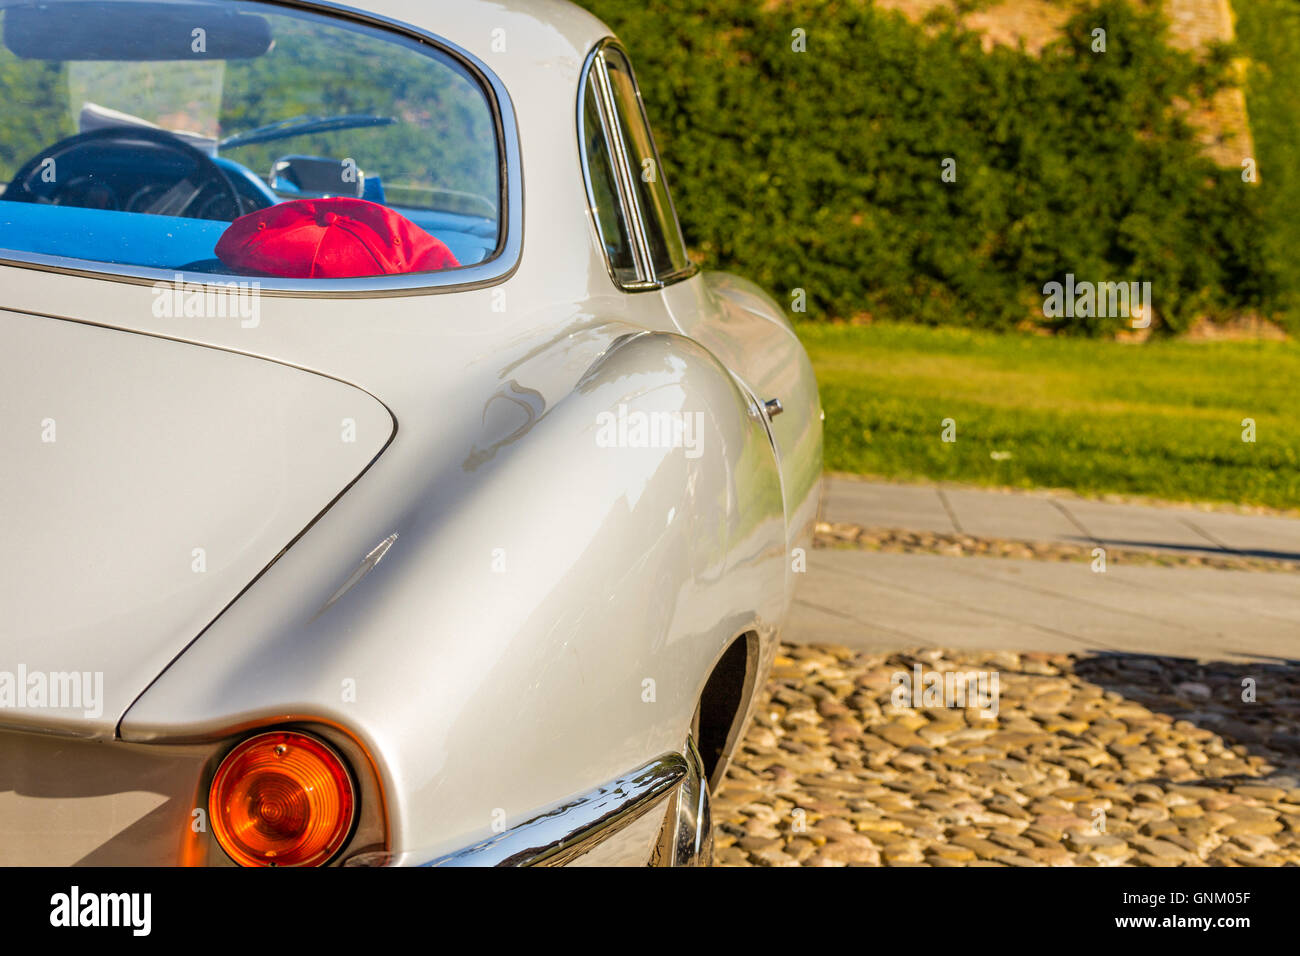 view from behind of the sinuous line of the bodywork of vintage sports car Stock Photo